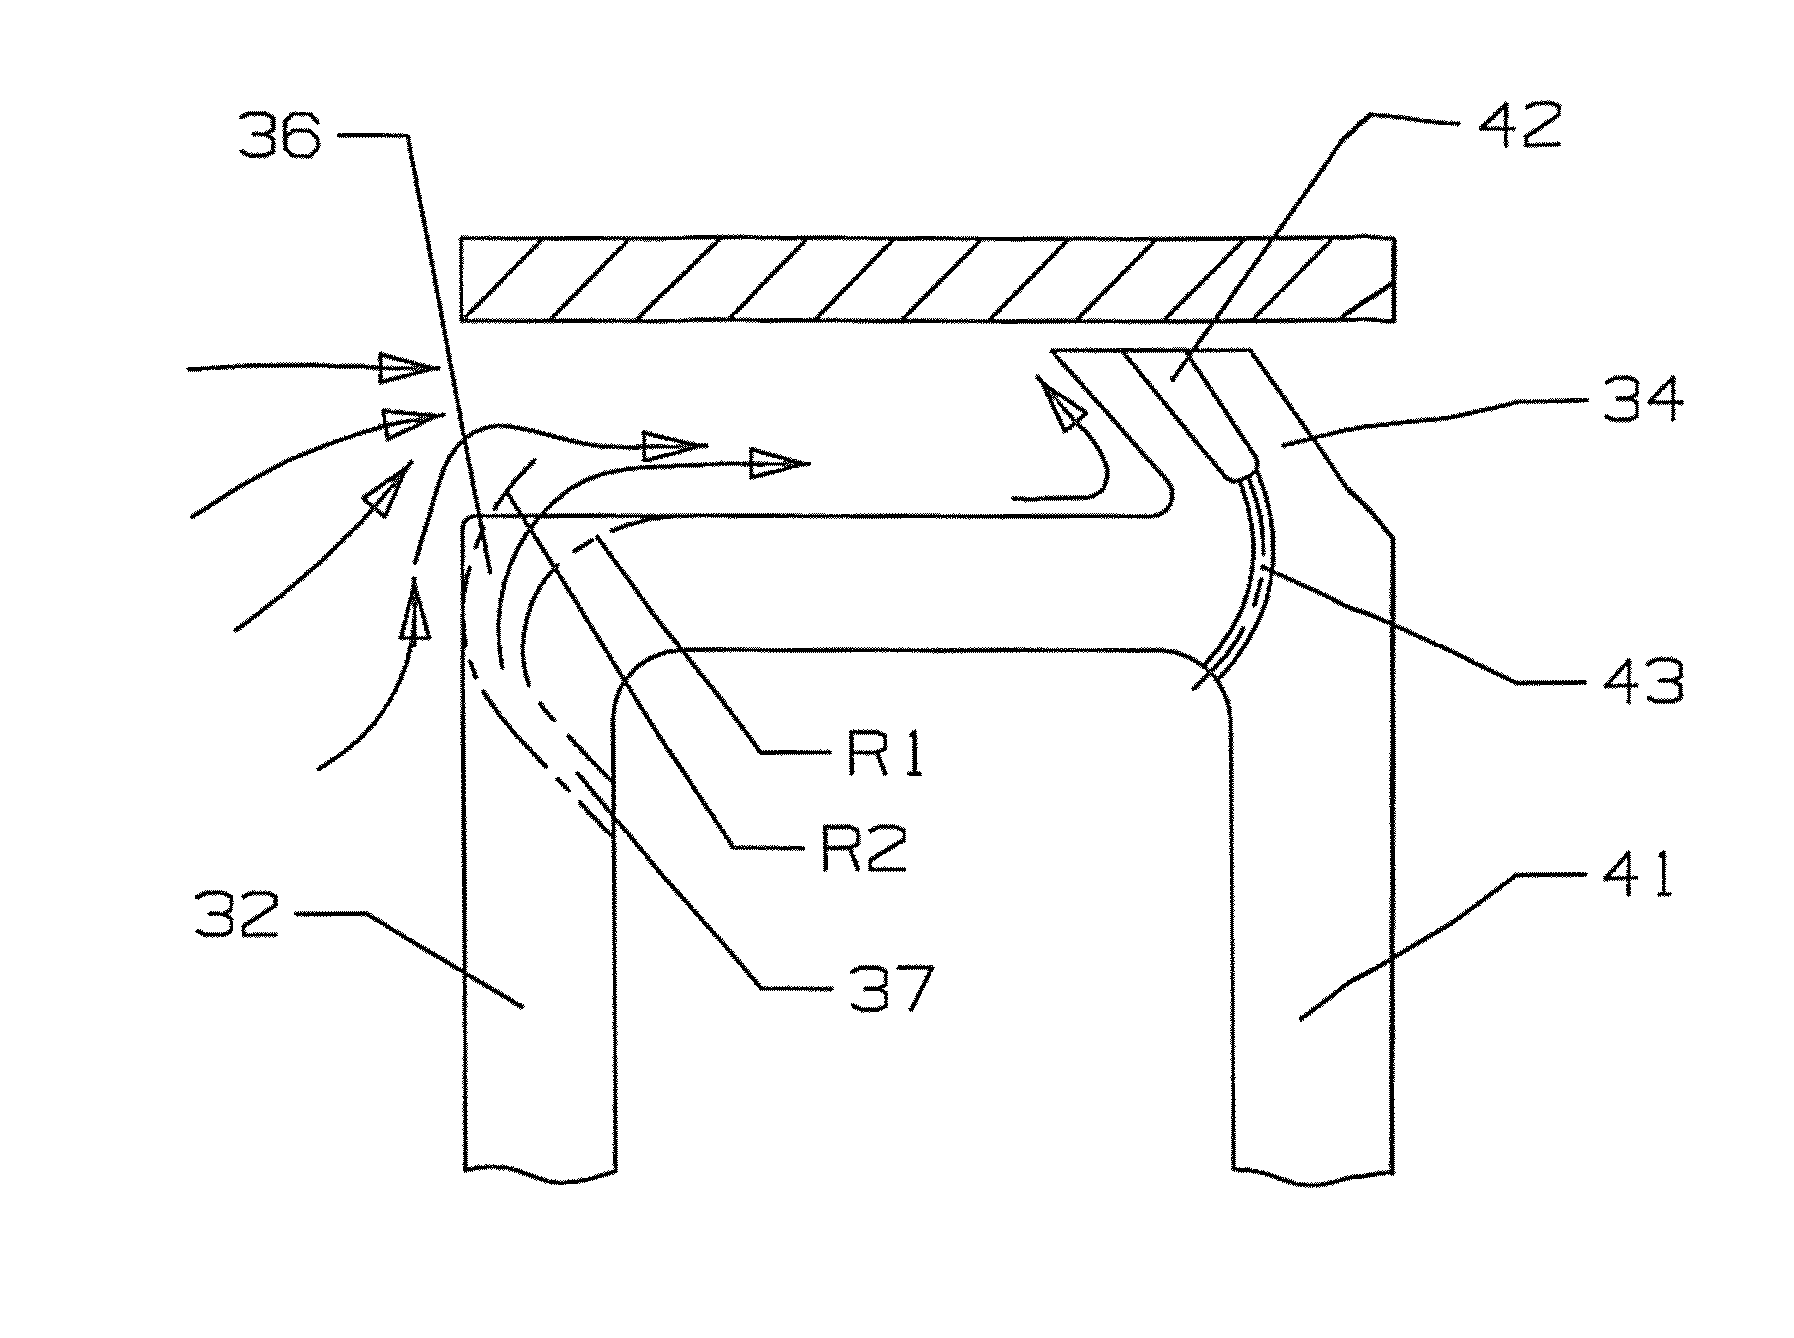 Turbine blade with tip section cooling